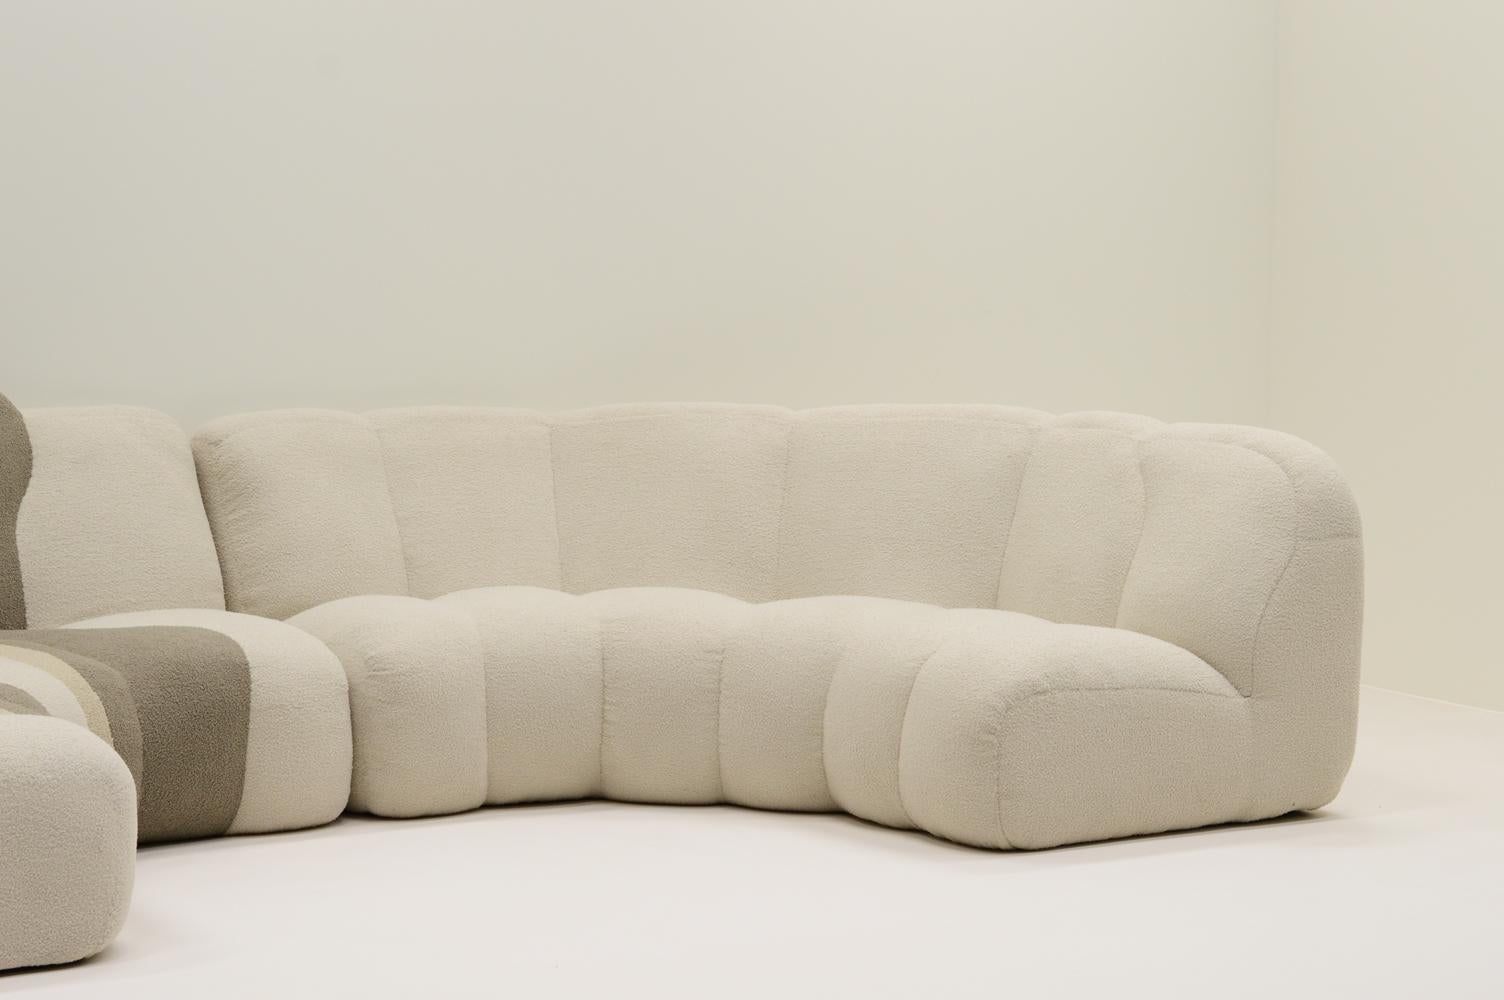 Late 20th Century Playful Teddy Sofa by Design Studio Polster Mit Pep, Germany 80s